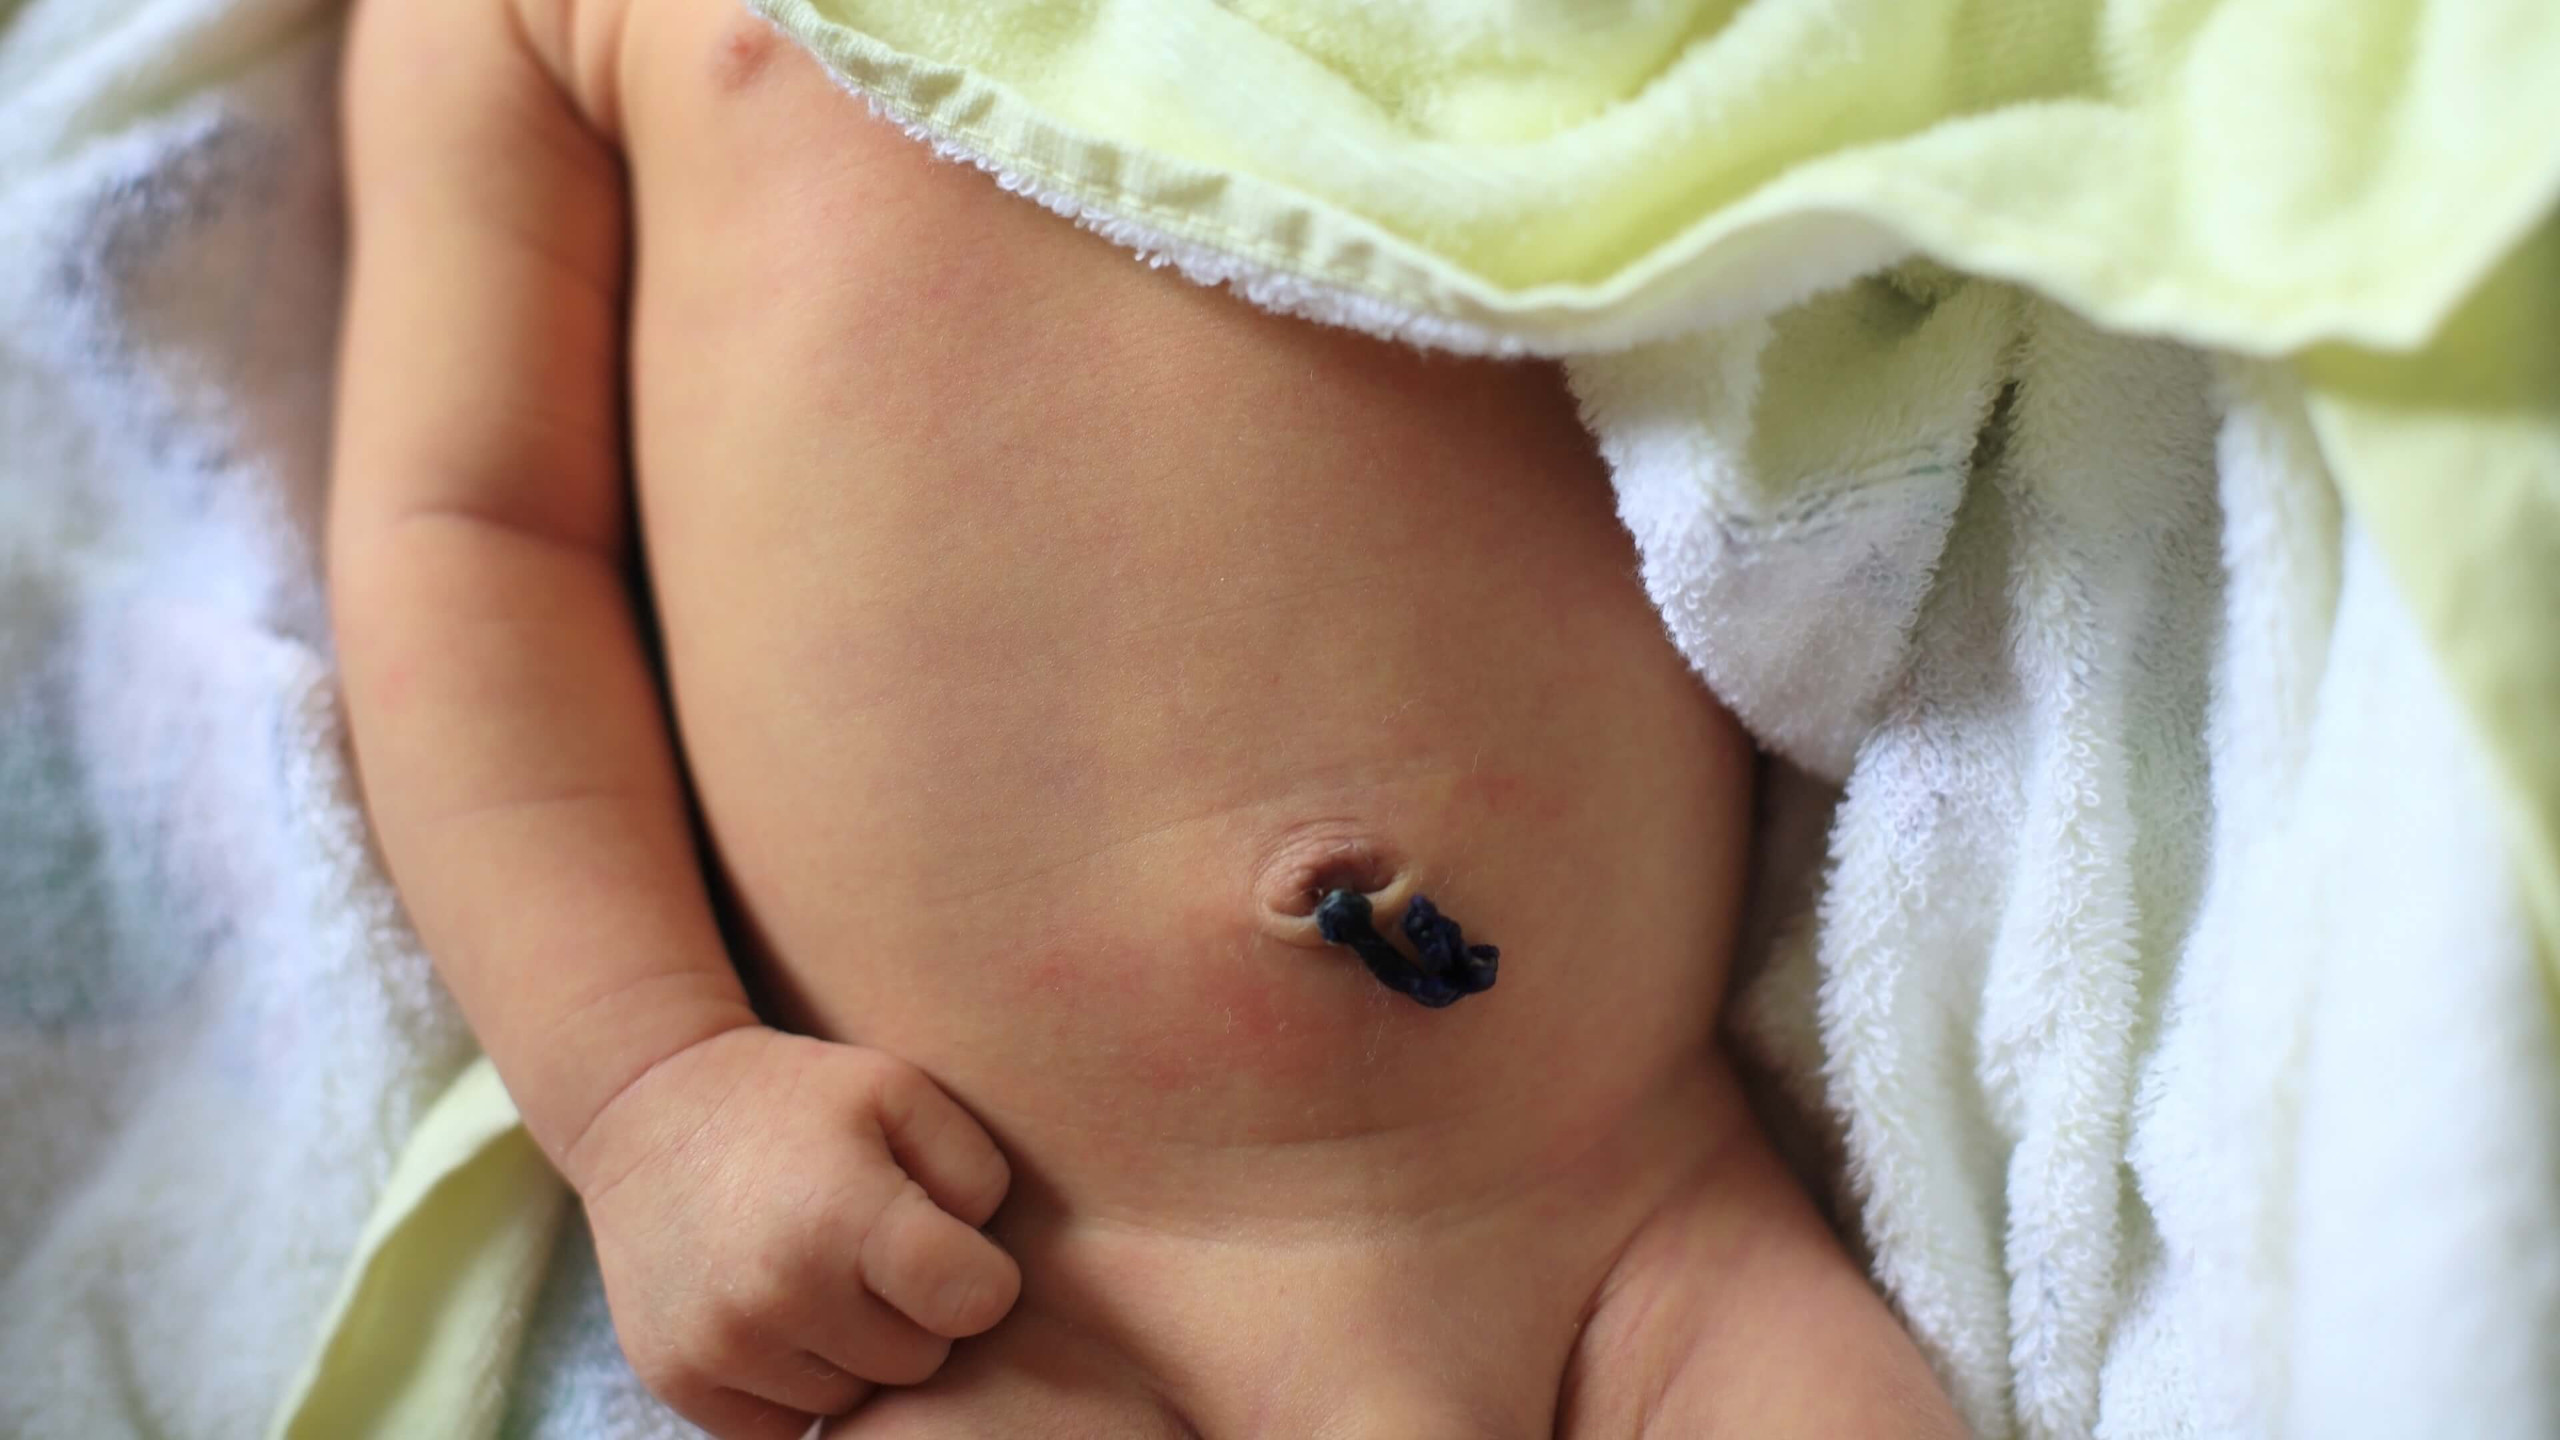 Umbilical Cord Care: Tips on Cleaning and Avoiding Infection